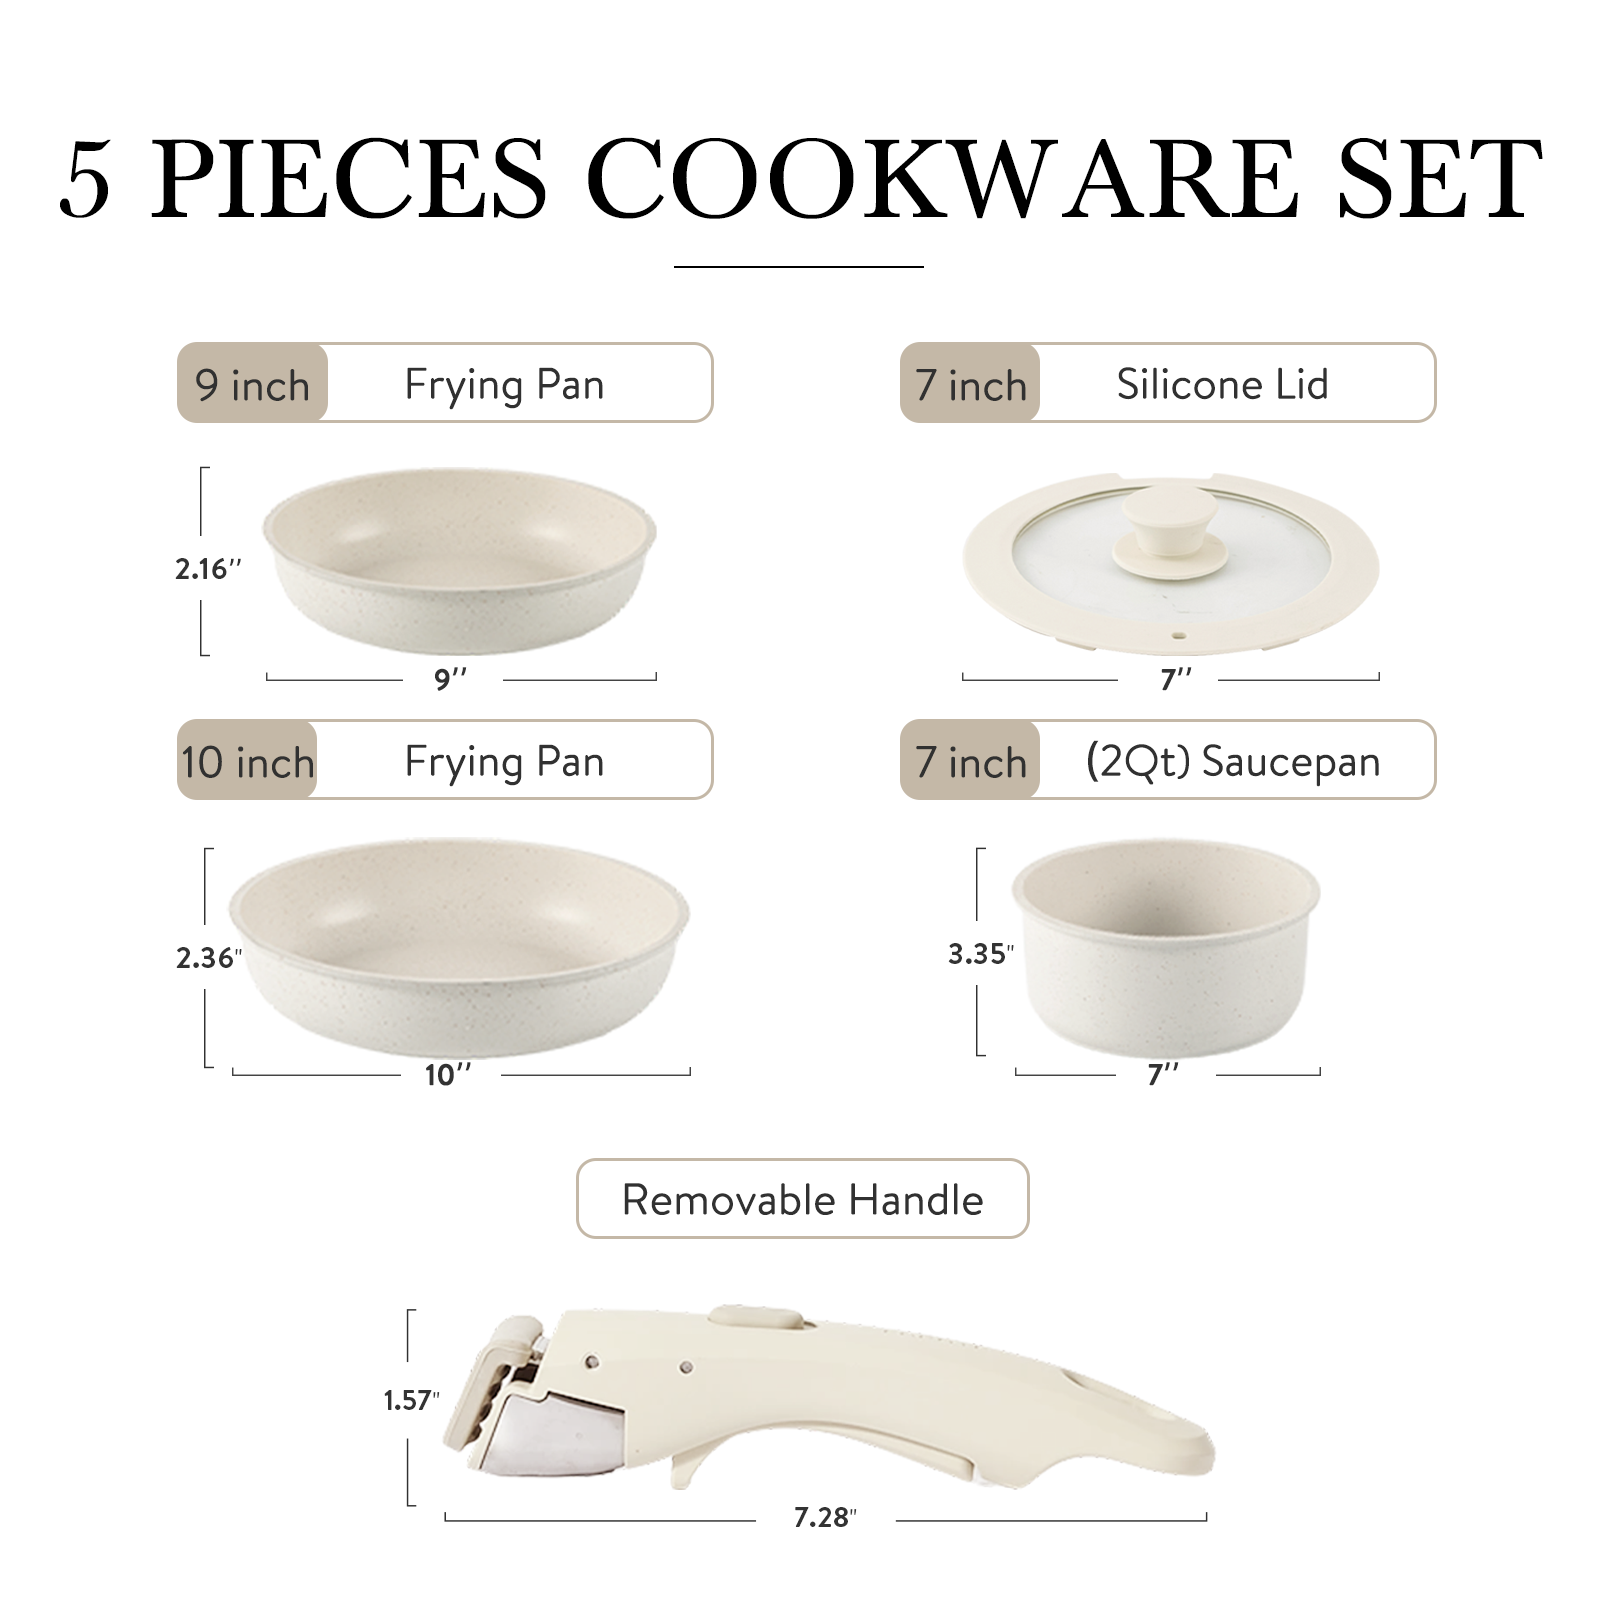 CAROTE 5-Piece Nonstick Cookware Set with Detachable Handles - White